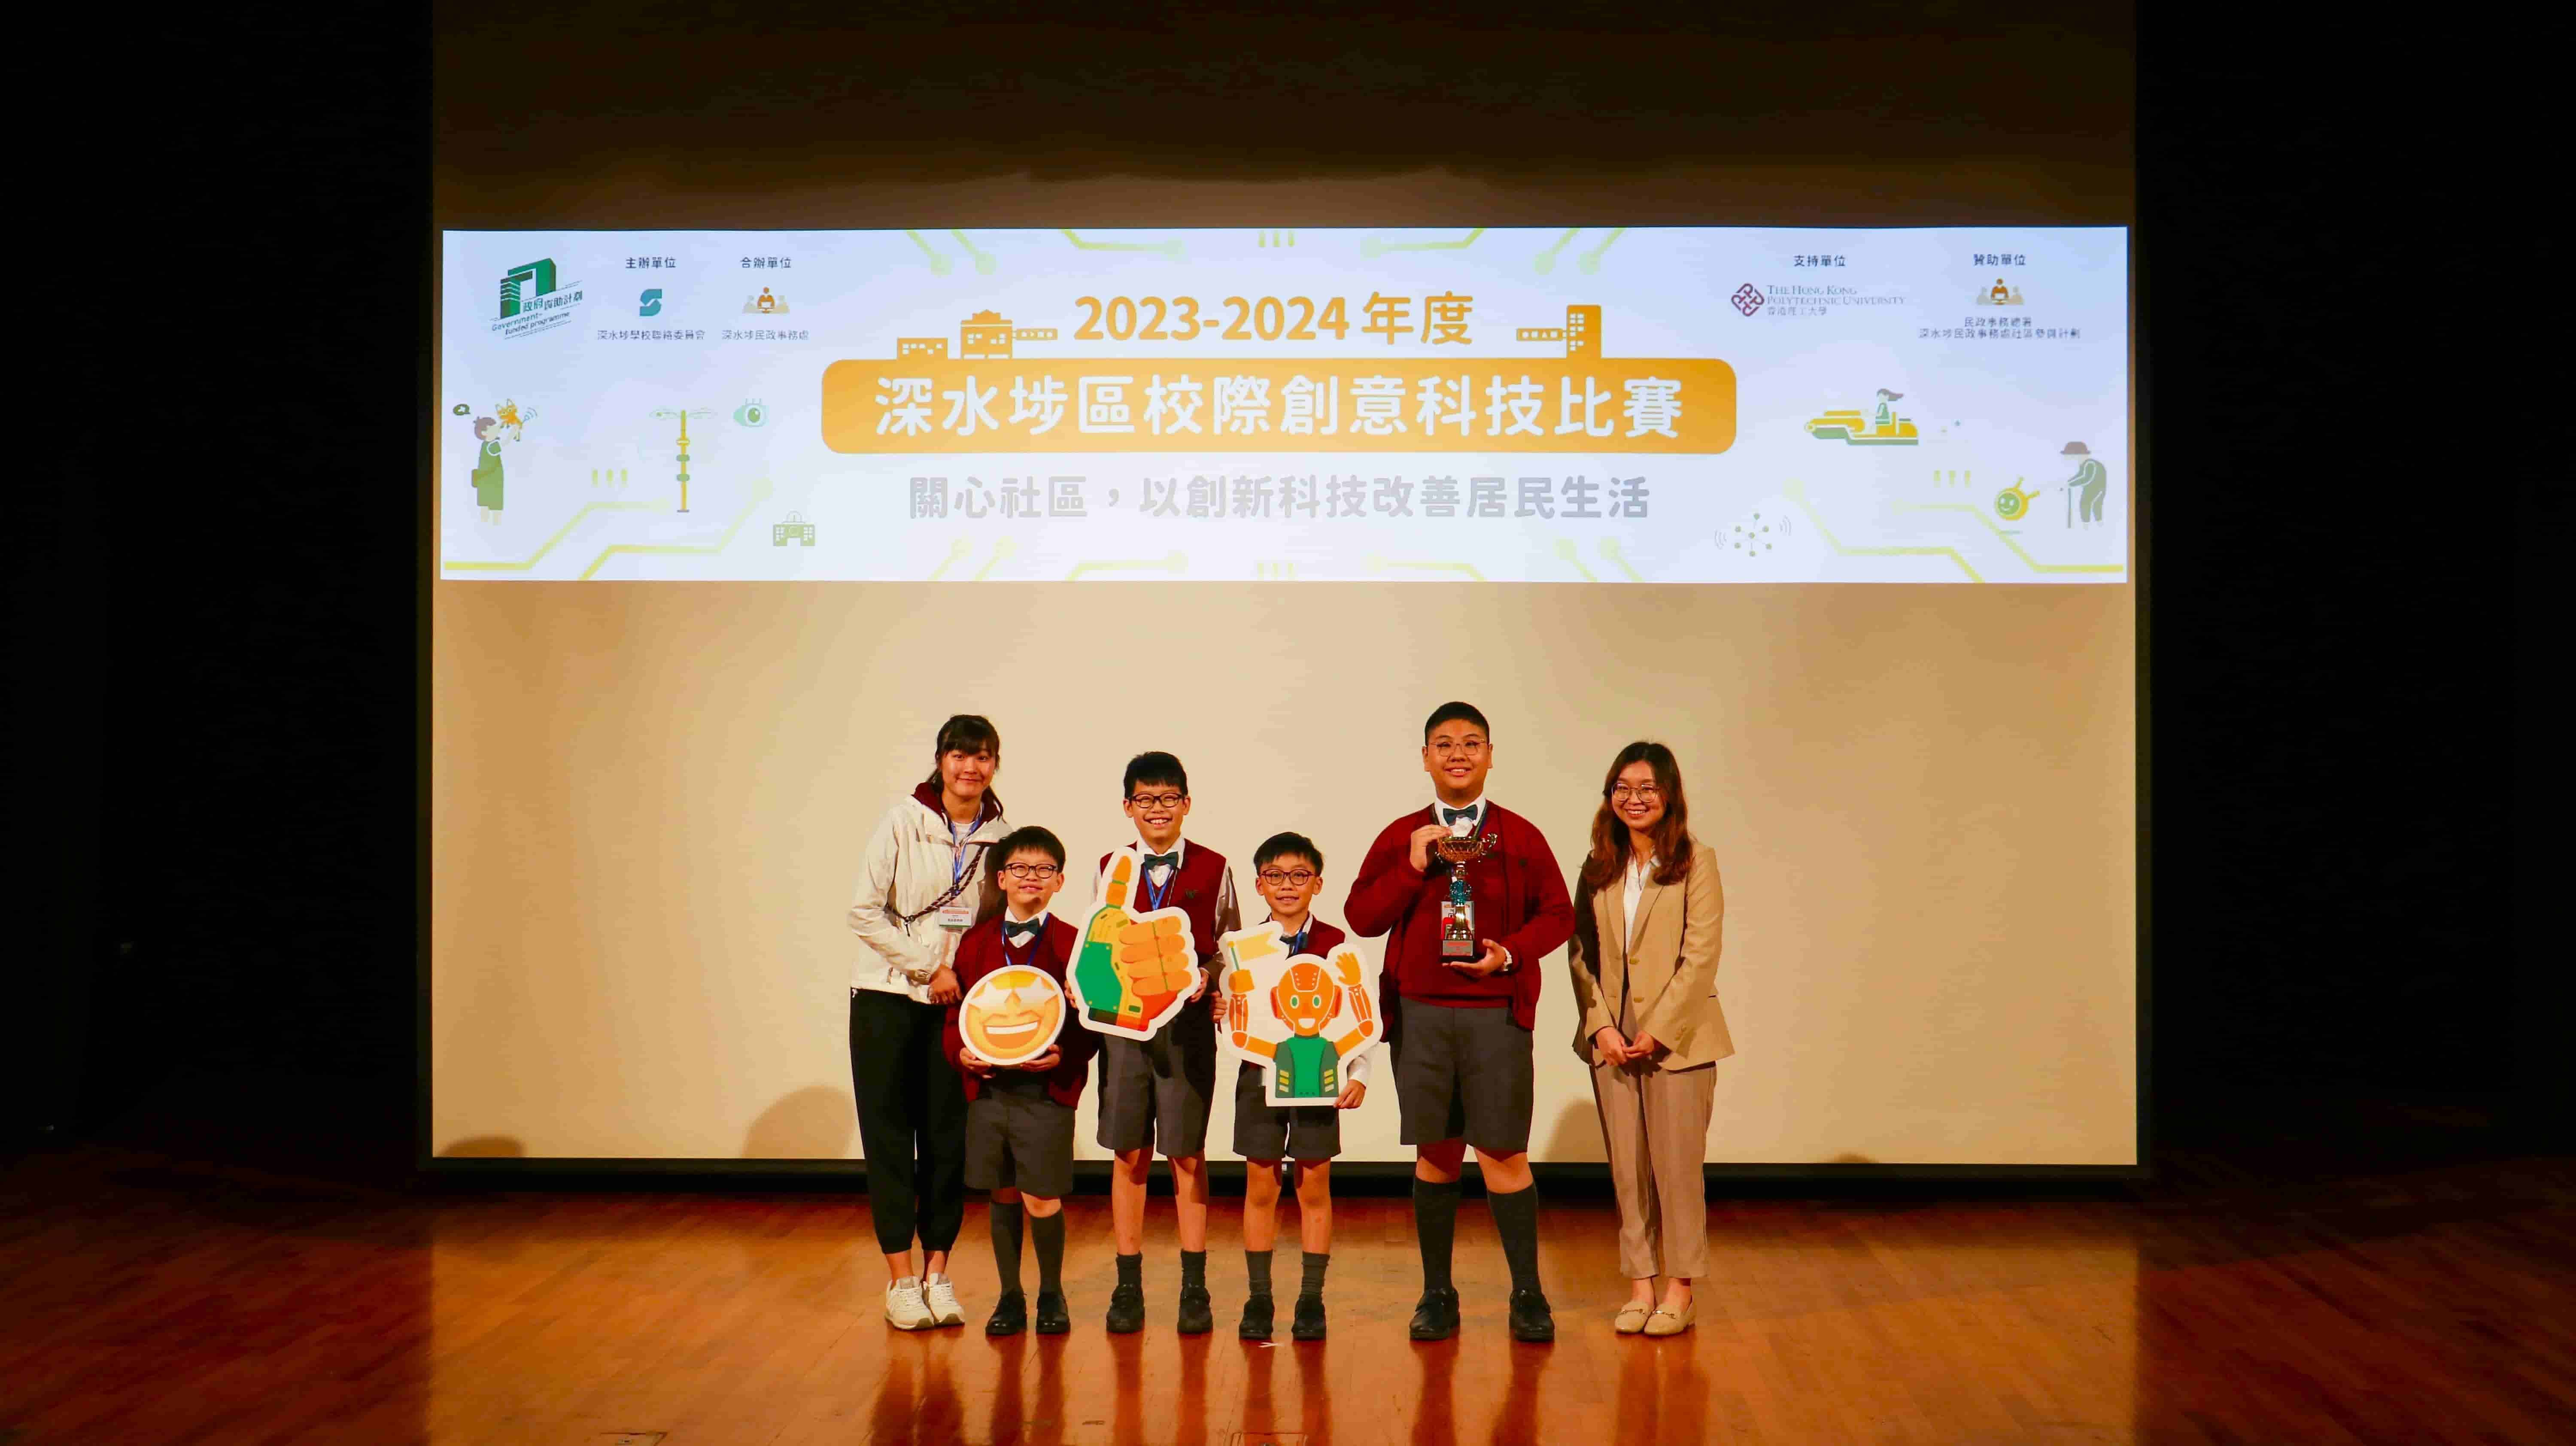 Sham Shui Po District Inter-School Innovation and Technology Competition 2023-2024